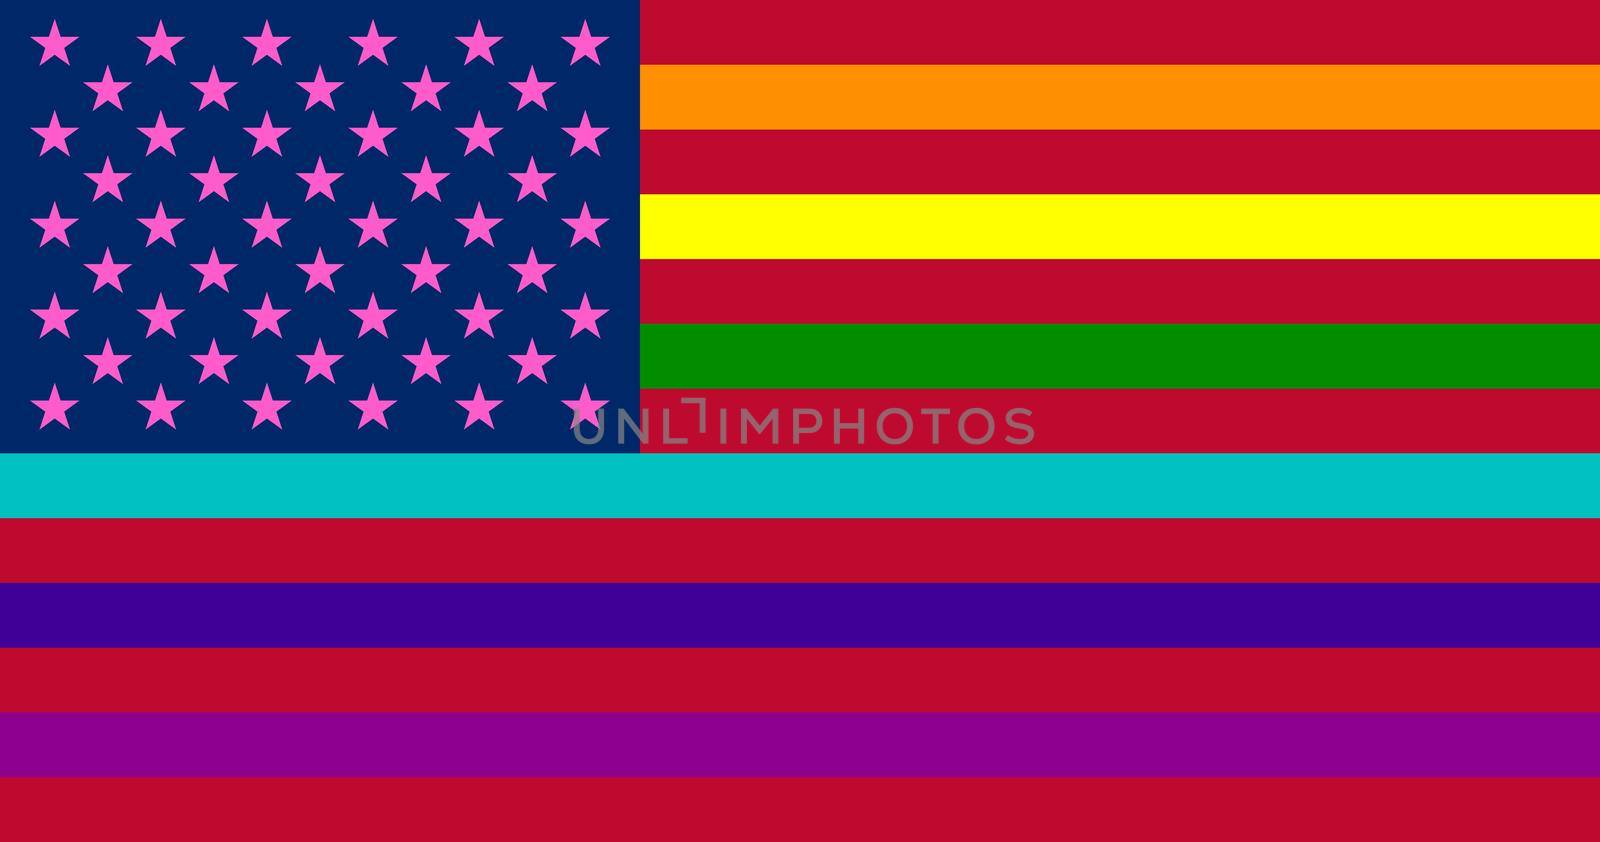 Top view of flag of USA, Gay, no flagpole. Plane design, layout. Flag background. Freedom and love concept. Pride month, activism, community and freedom